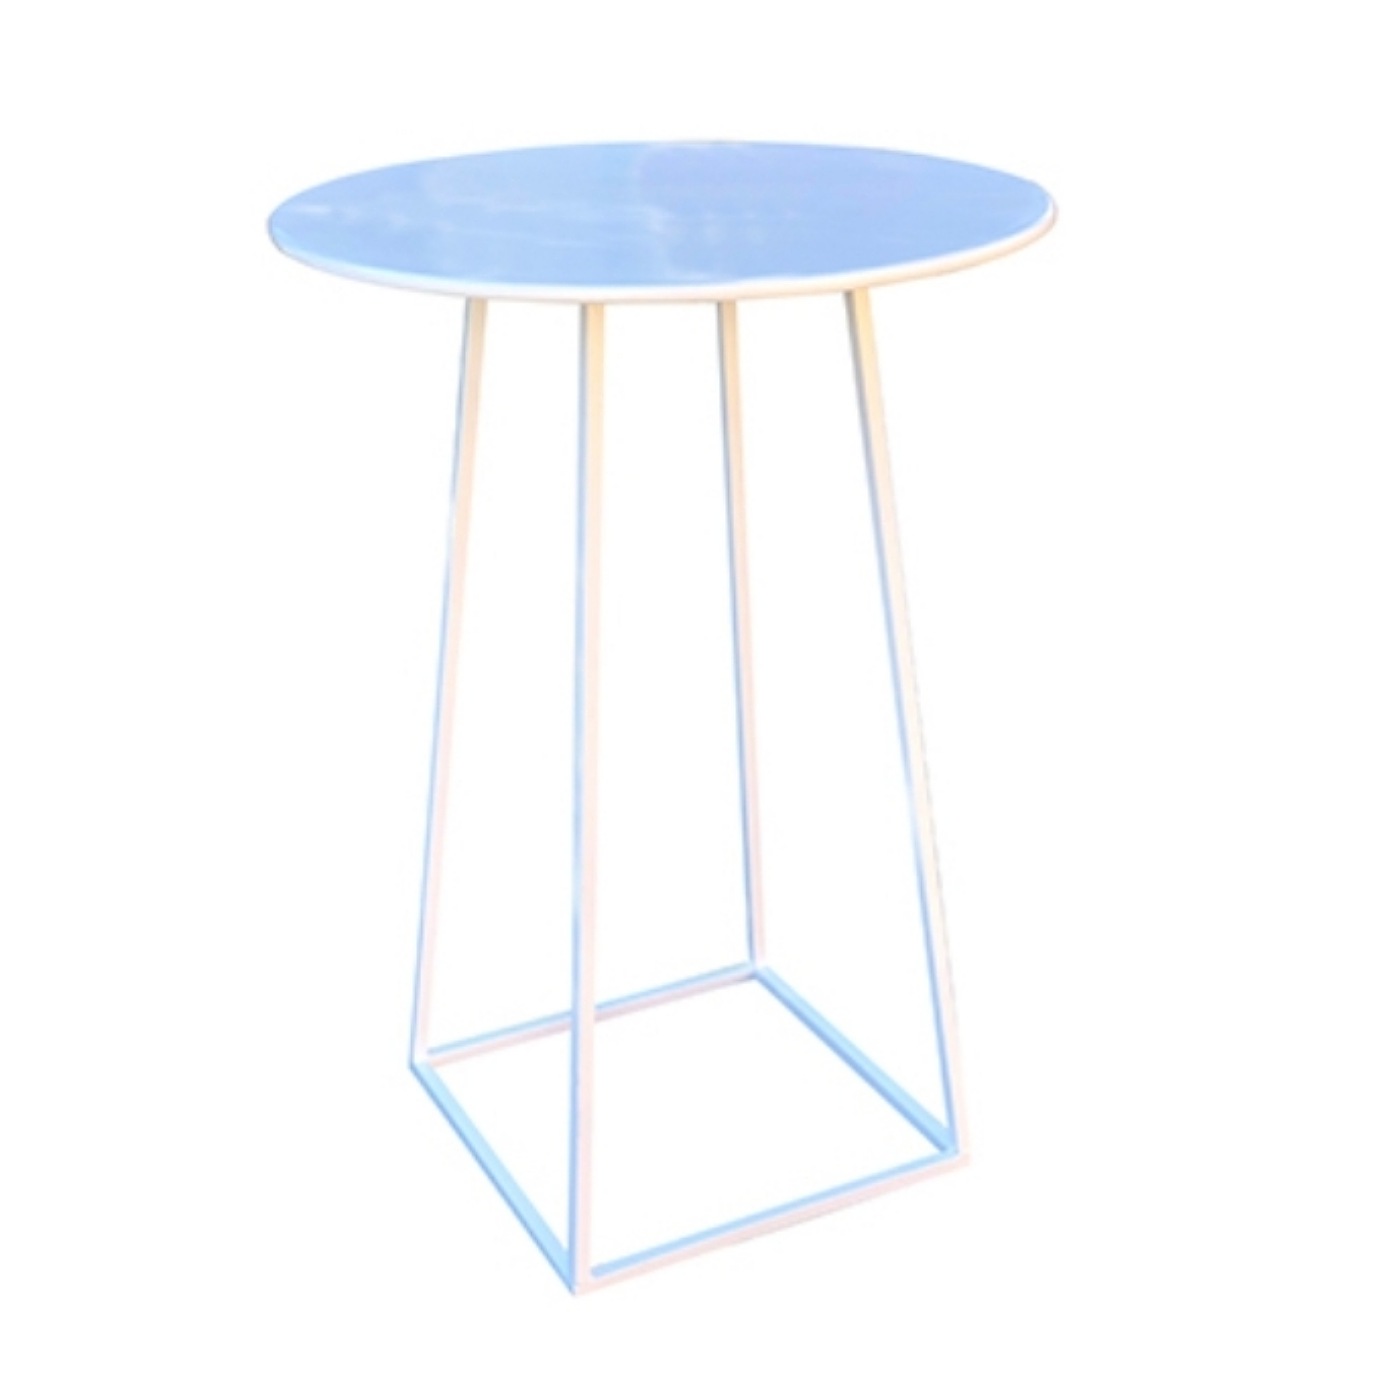 White Square Steel Frame Cocktail Table With Round White Top.